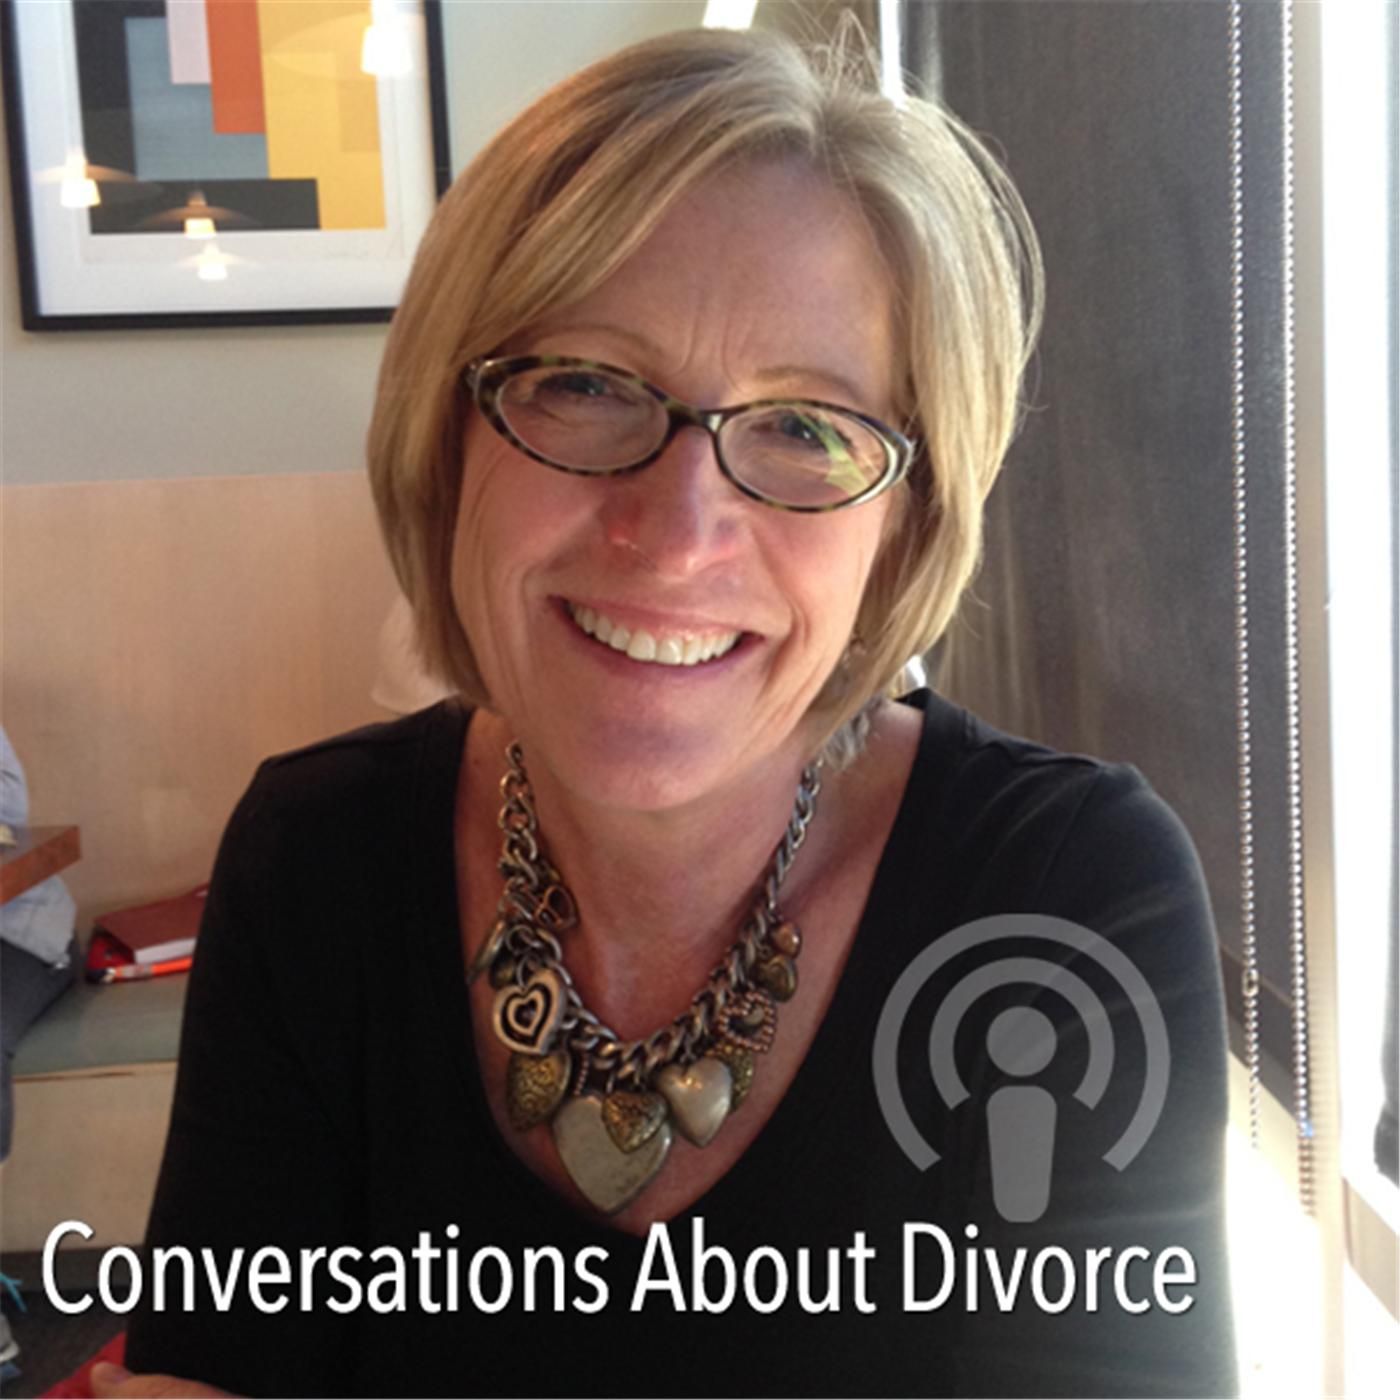 Conversations About Divorce - Is The Political Divide Threatening Your Marriage?